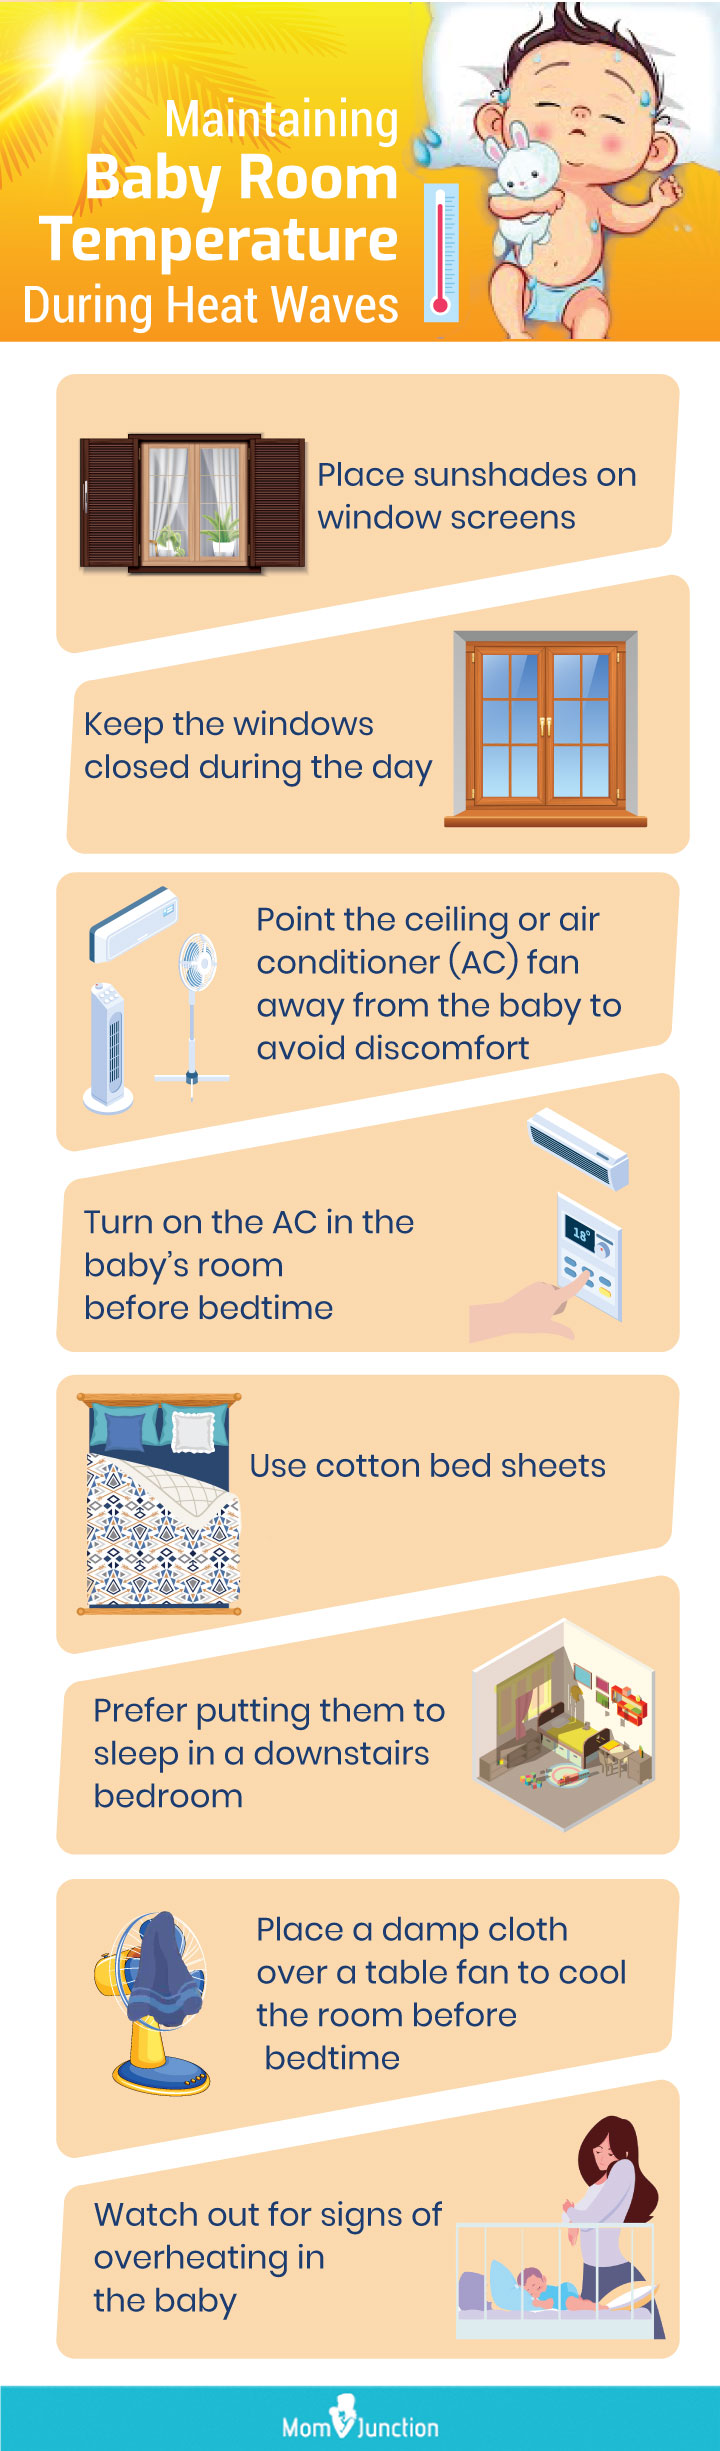 maintaining baby room temperature (infographic)